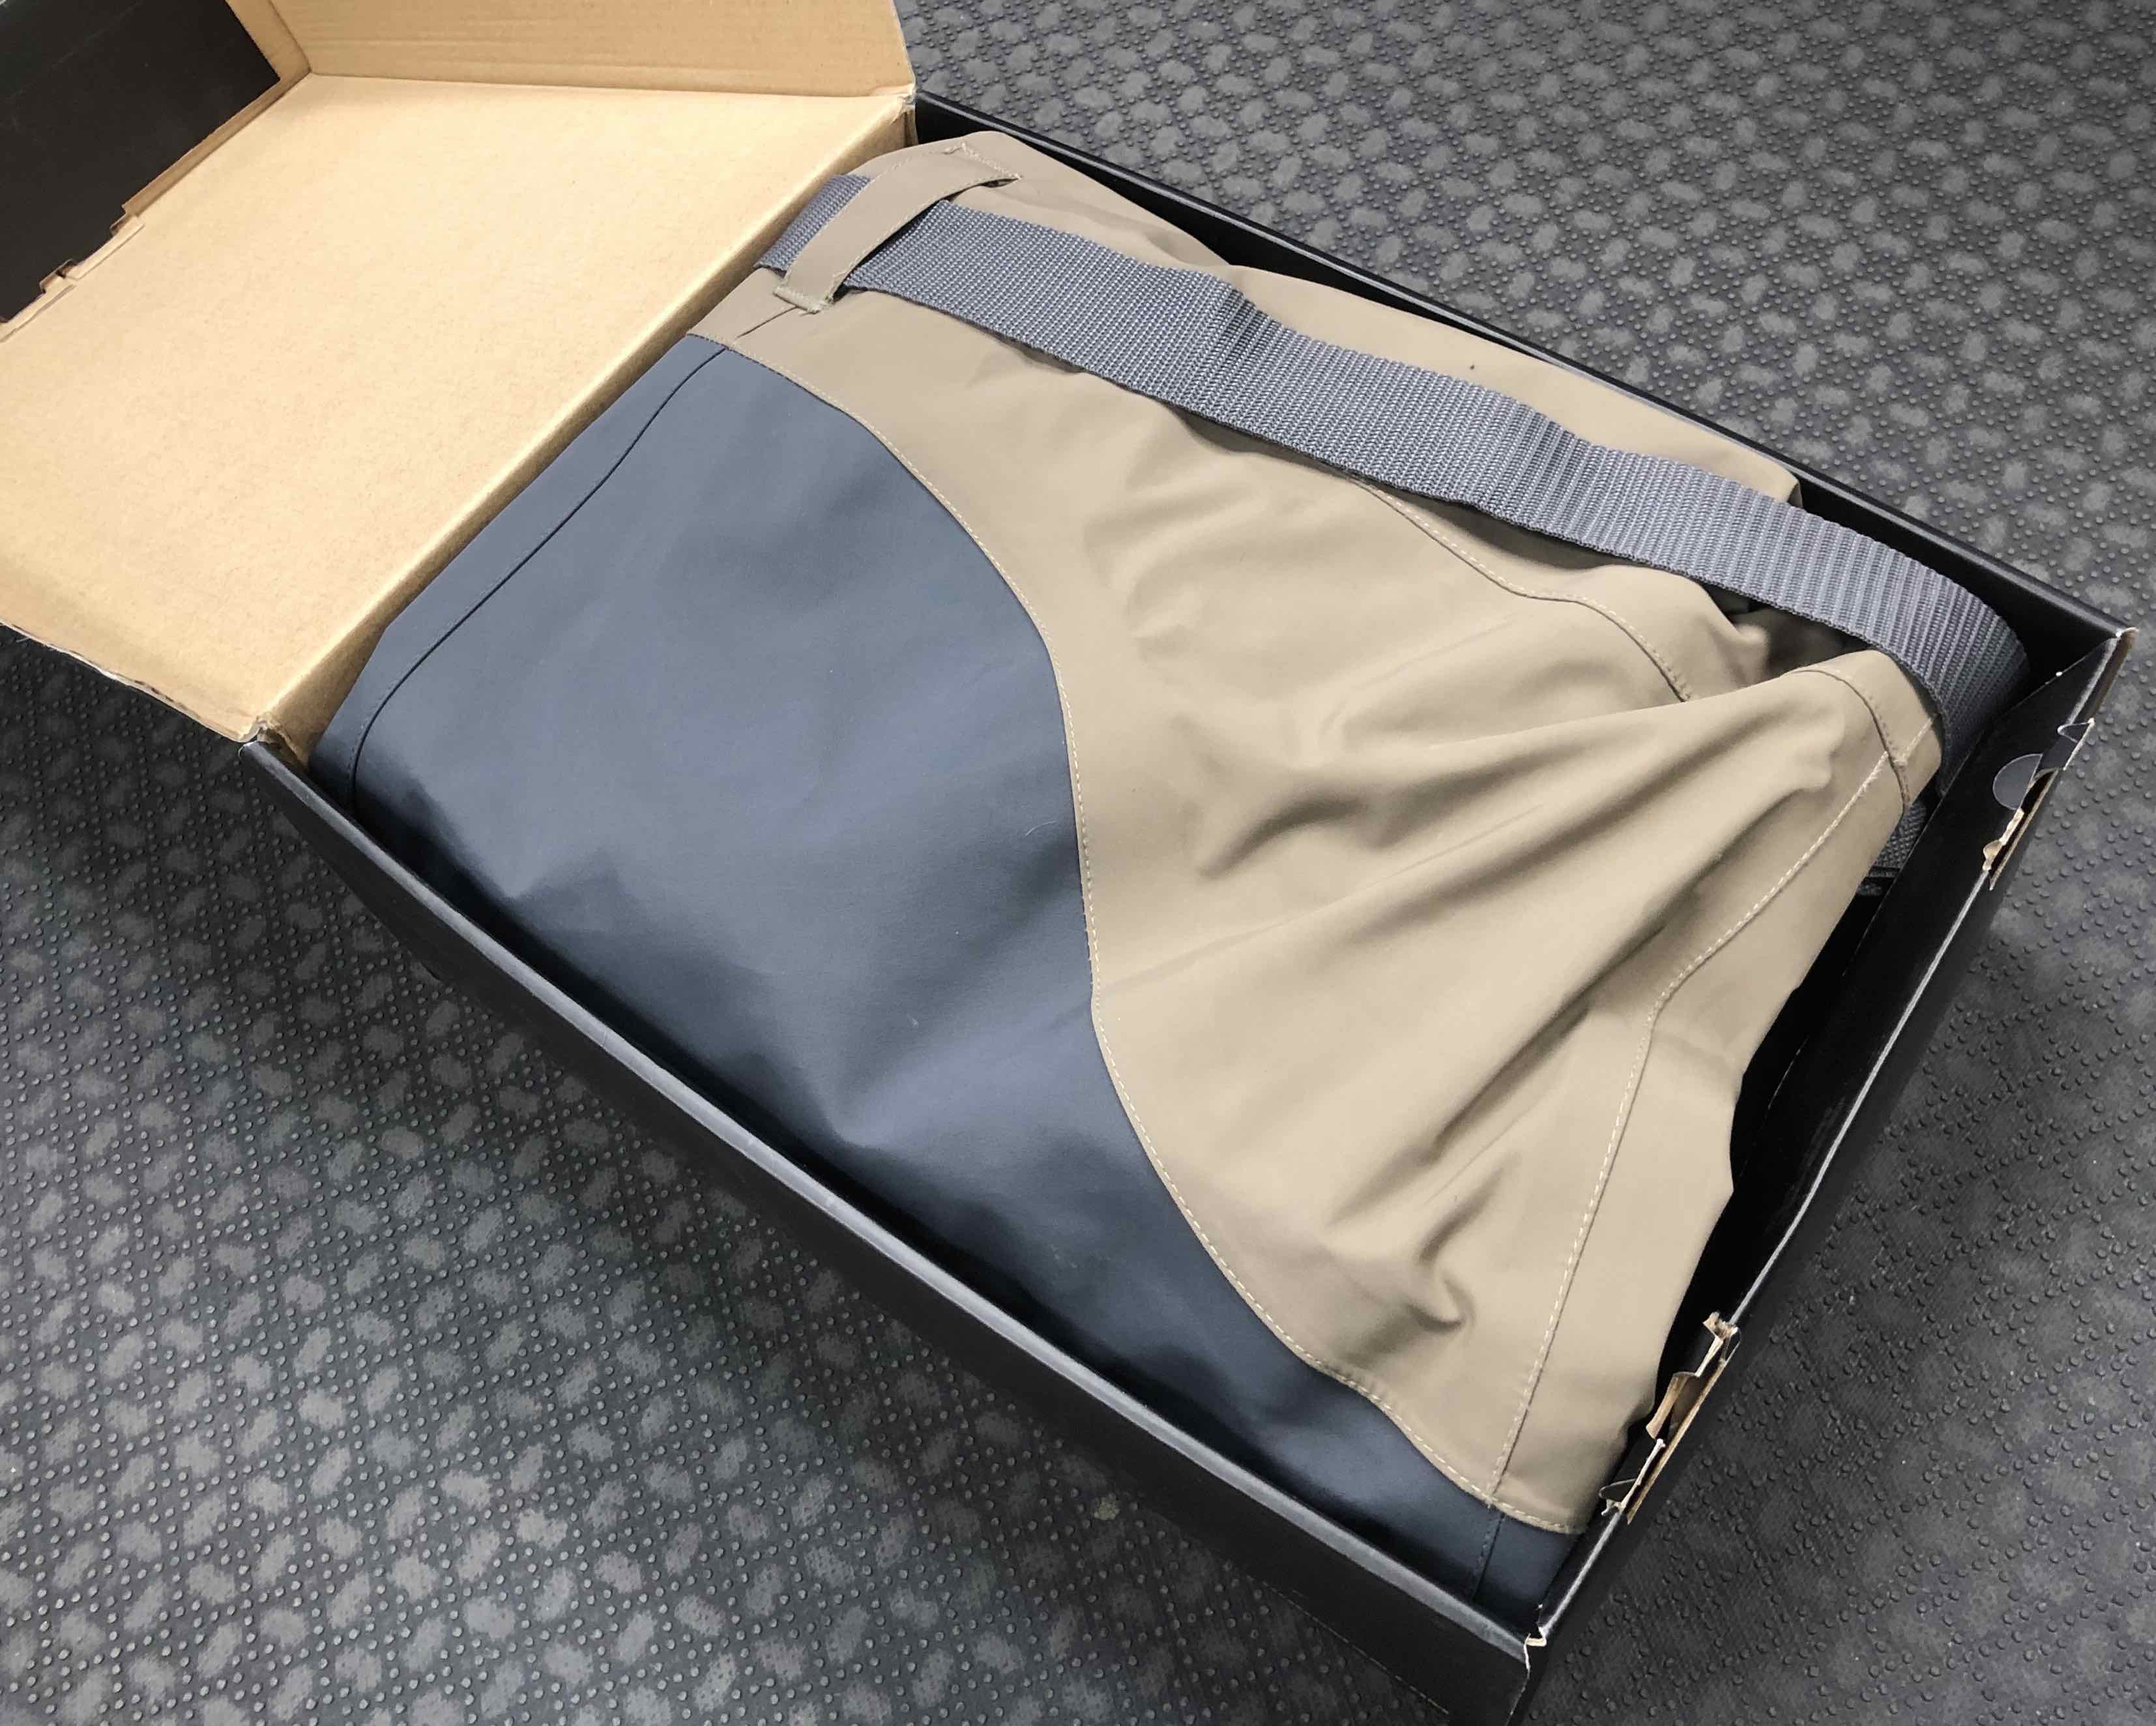 Hodgman HS Breathable Waders - NEW IN BOX! - $200